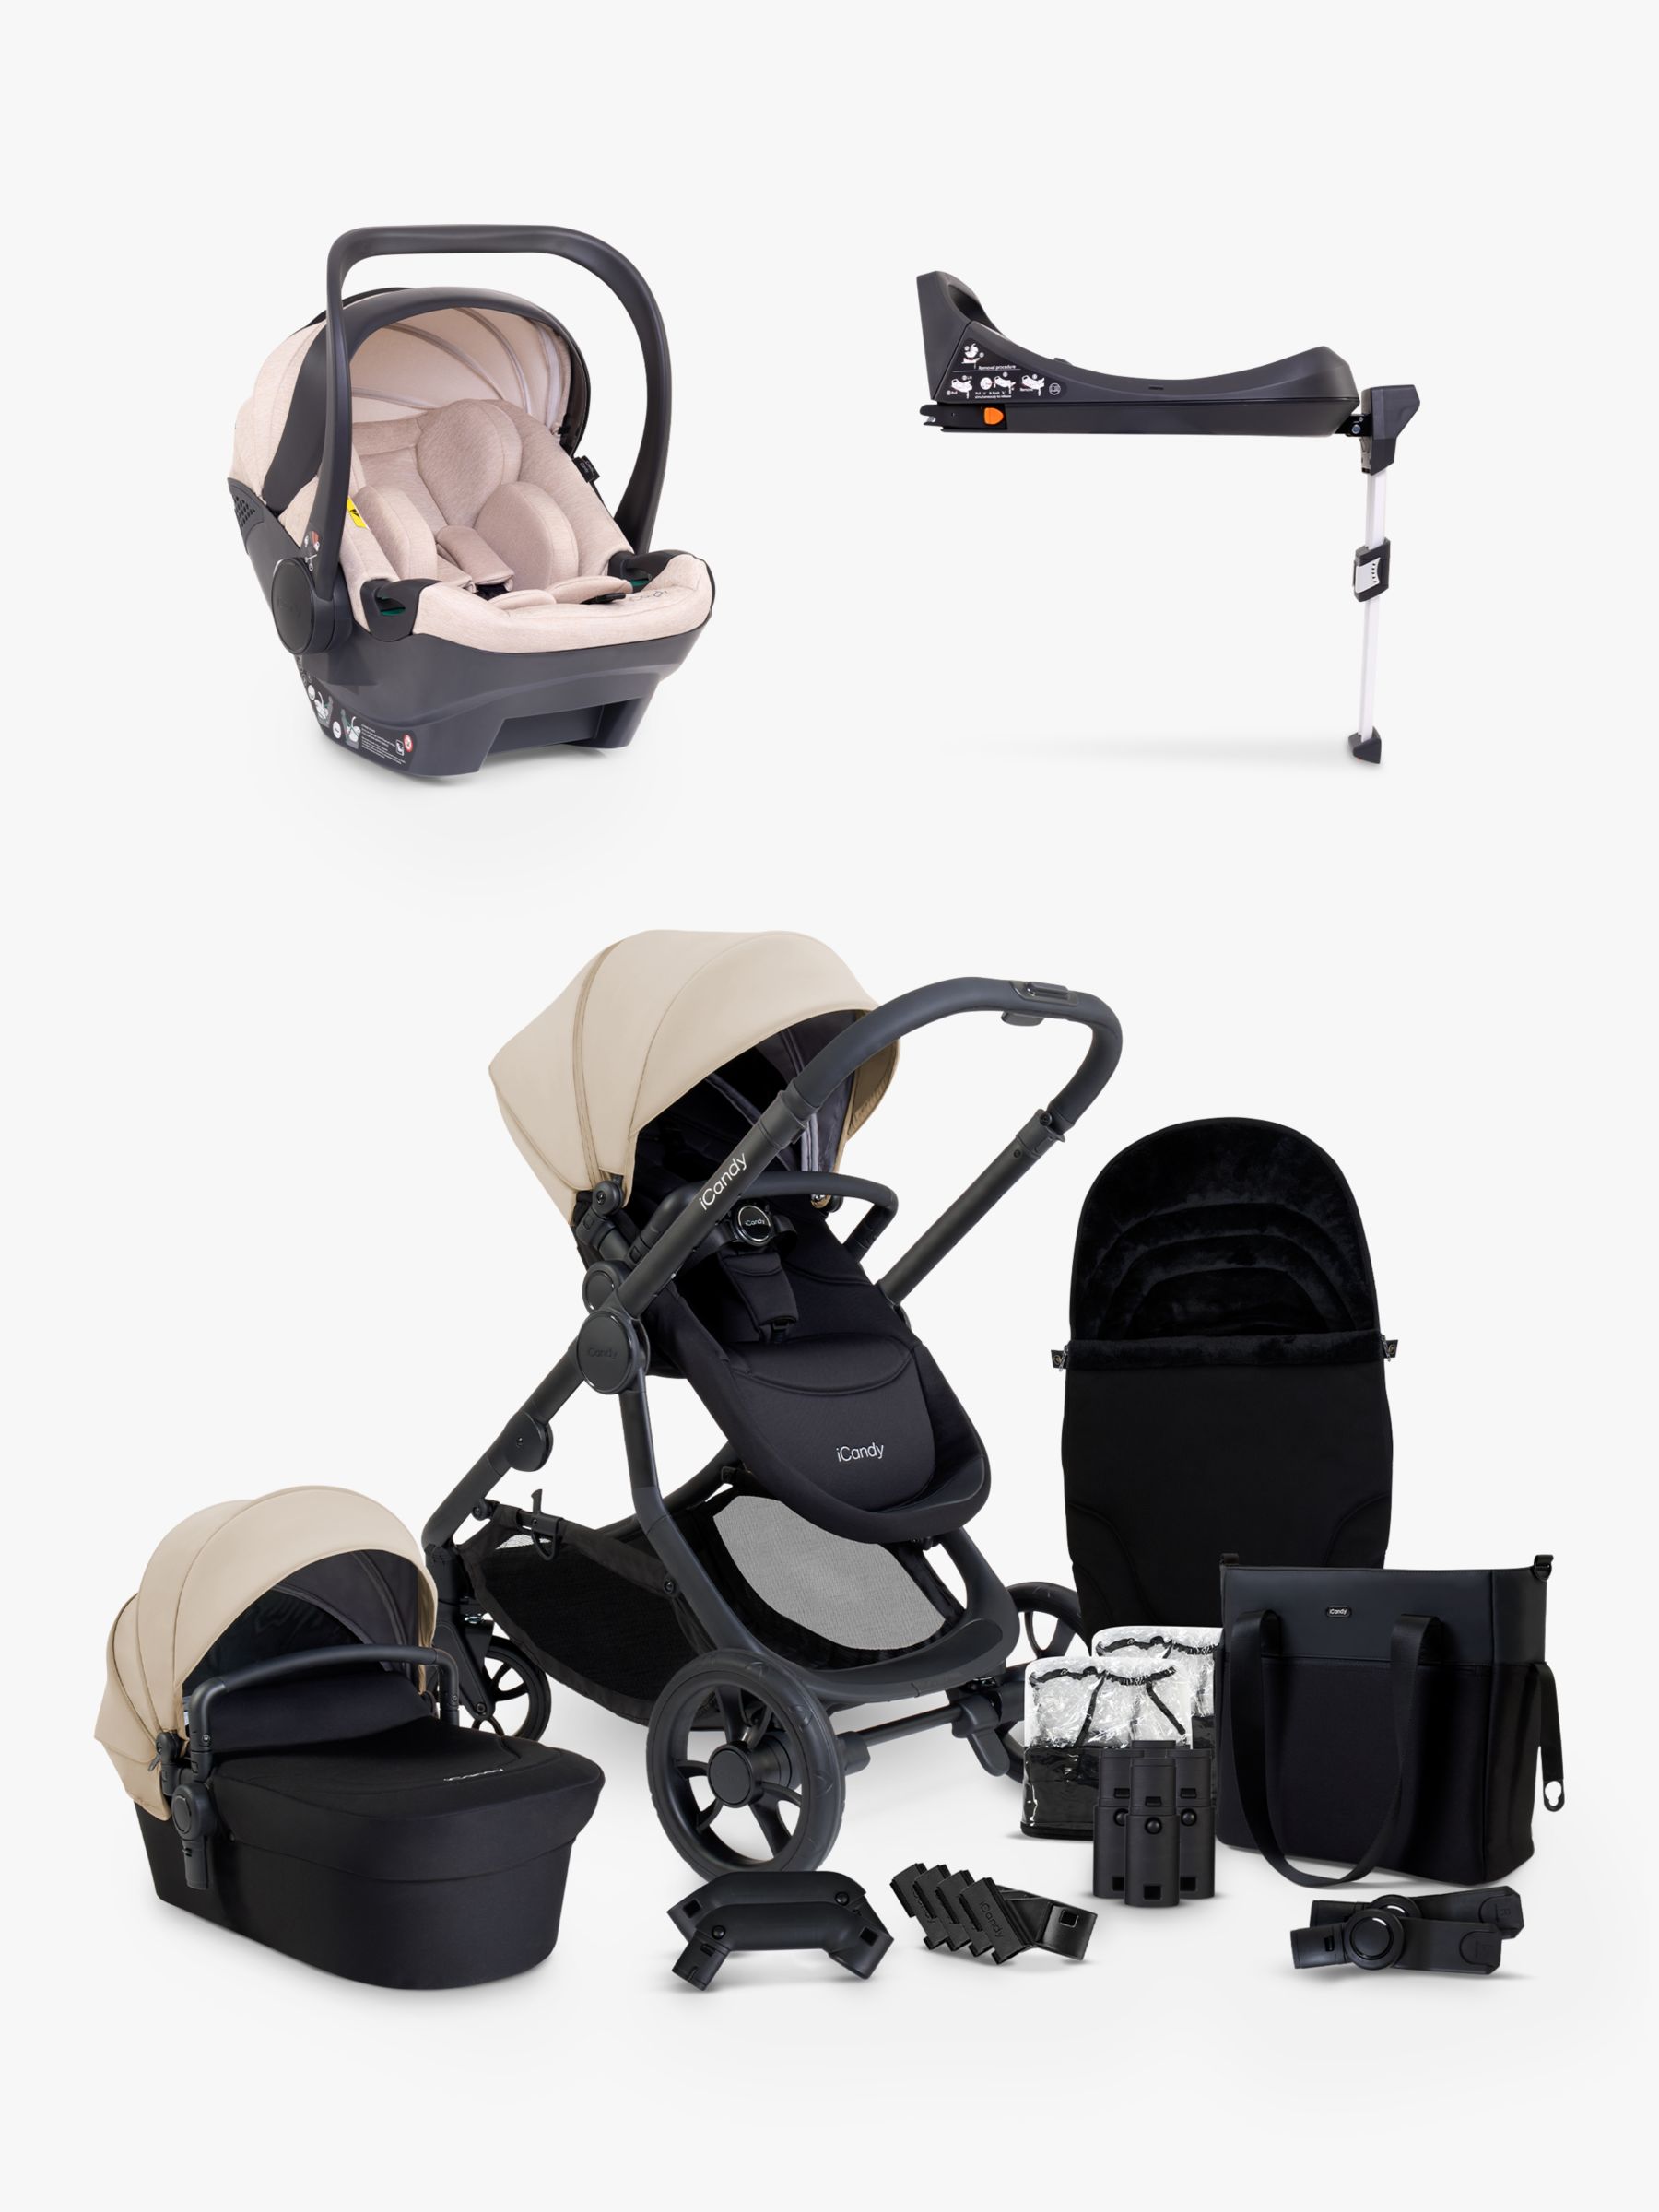 iCandy 4 Pushchair, Carrycot & Accessories with Cocoon Car Seat and Base Travel Bundle